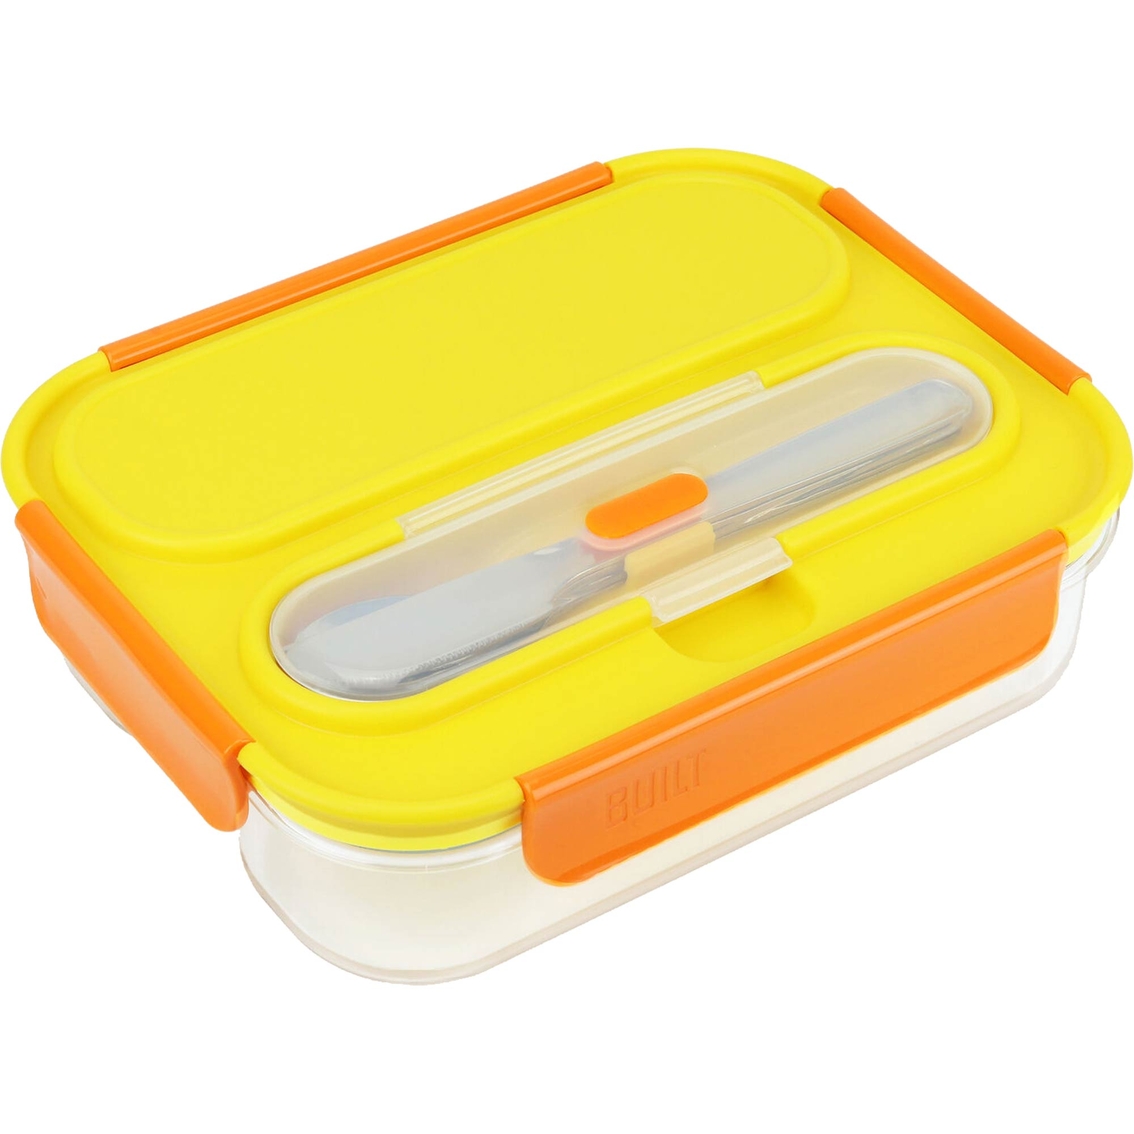 BUILT Gourmet 2 Compartment Bento with Ice Pack - Image 1 of 2